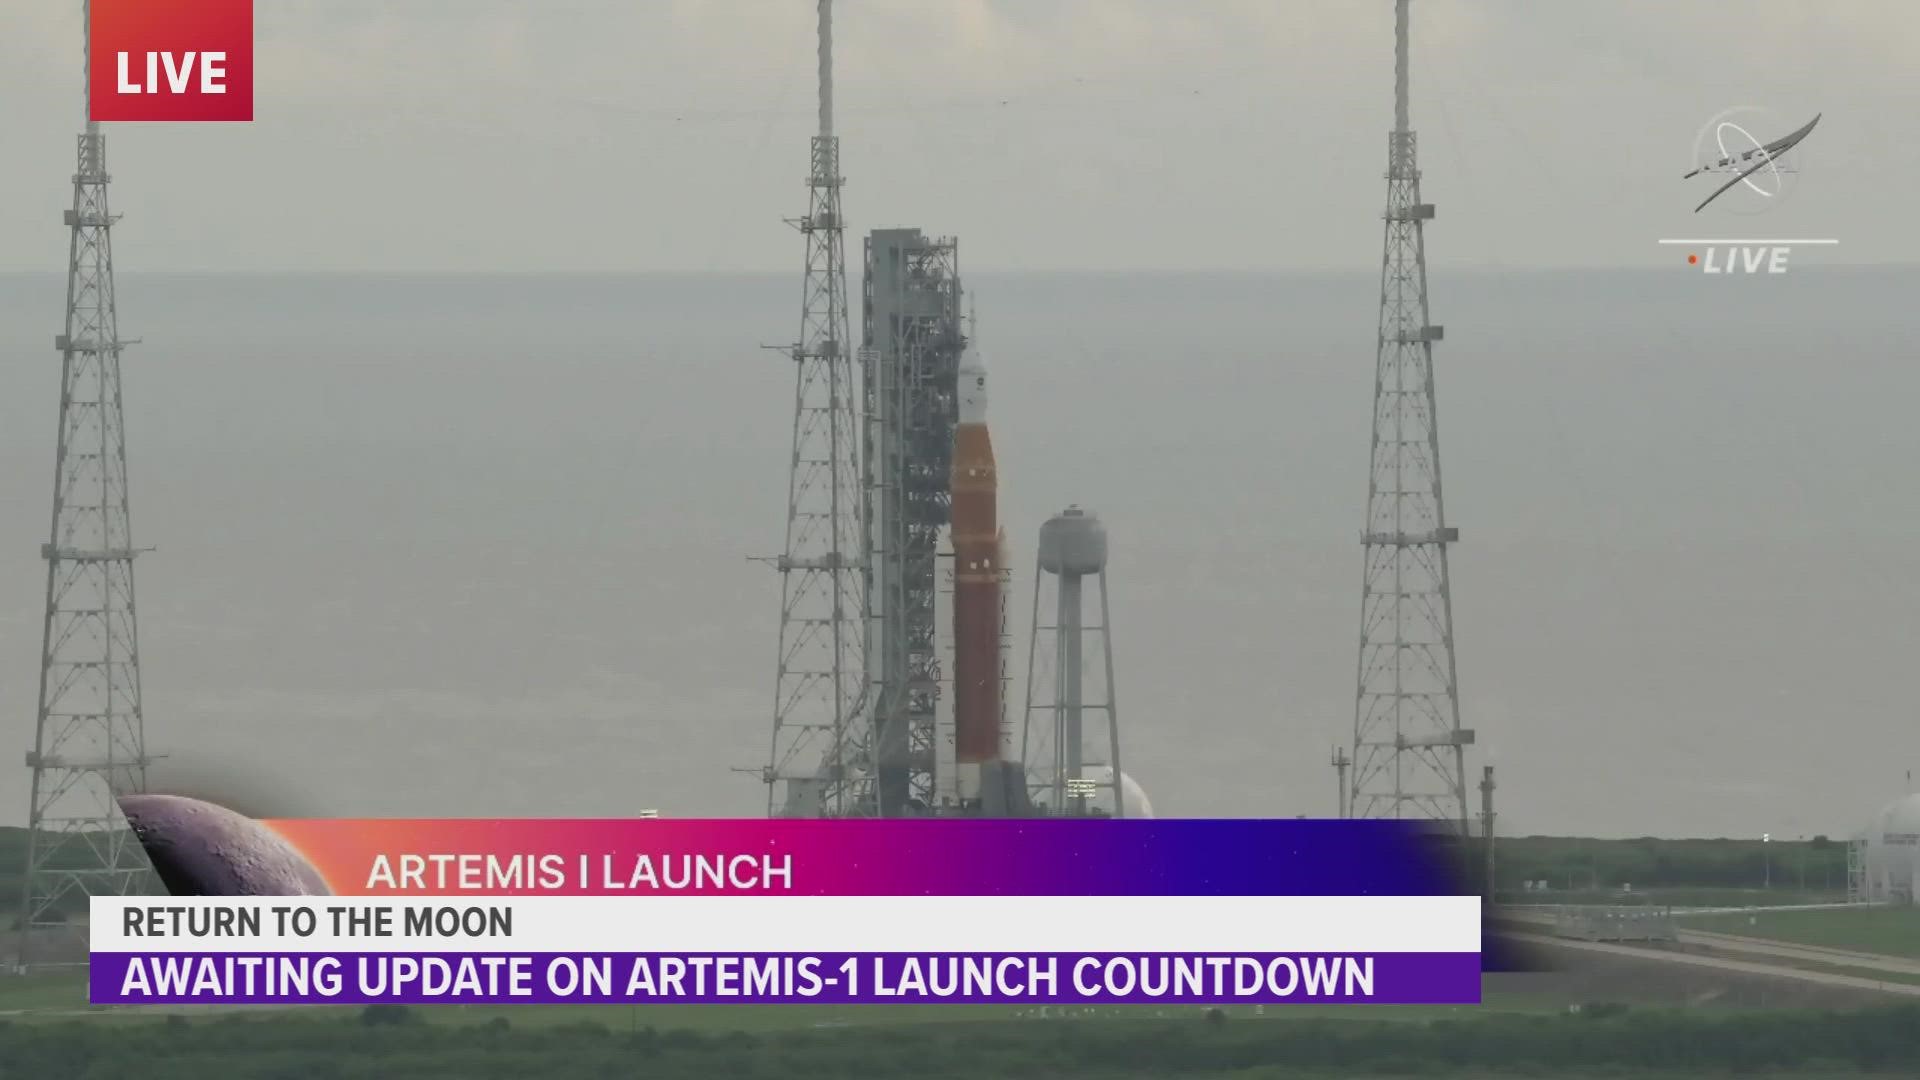 WATCH: The moment NASA announced a scrub of its Artemis moon rocket launch. The next launch window is on Friday.